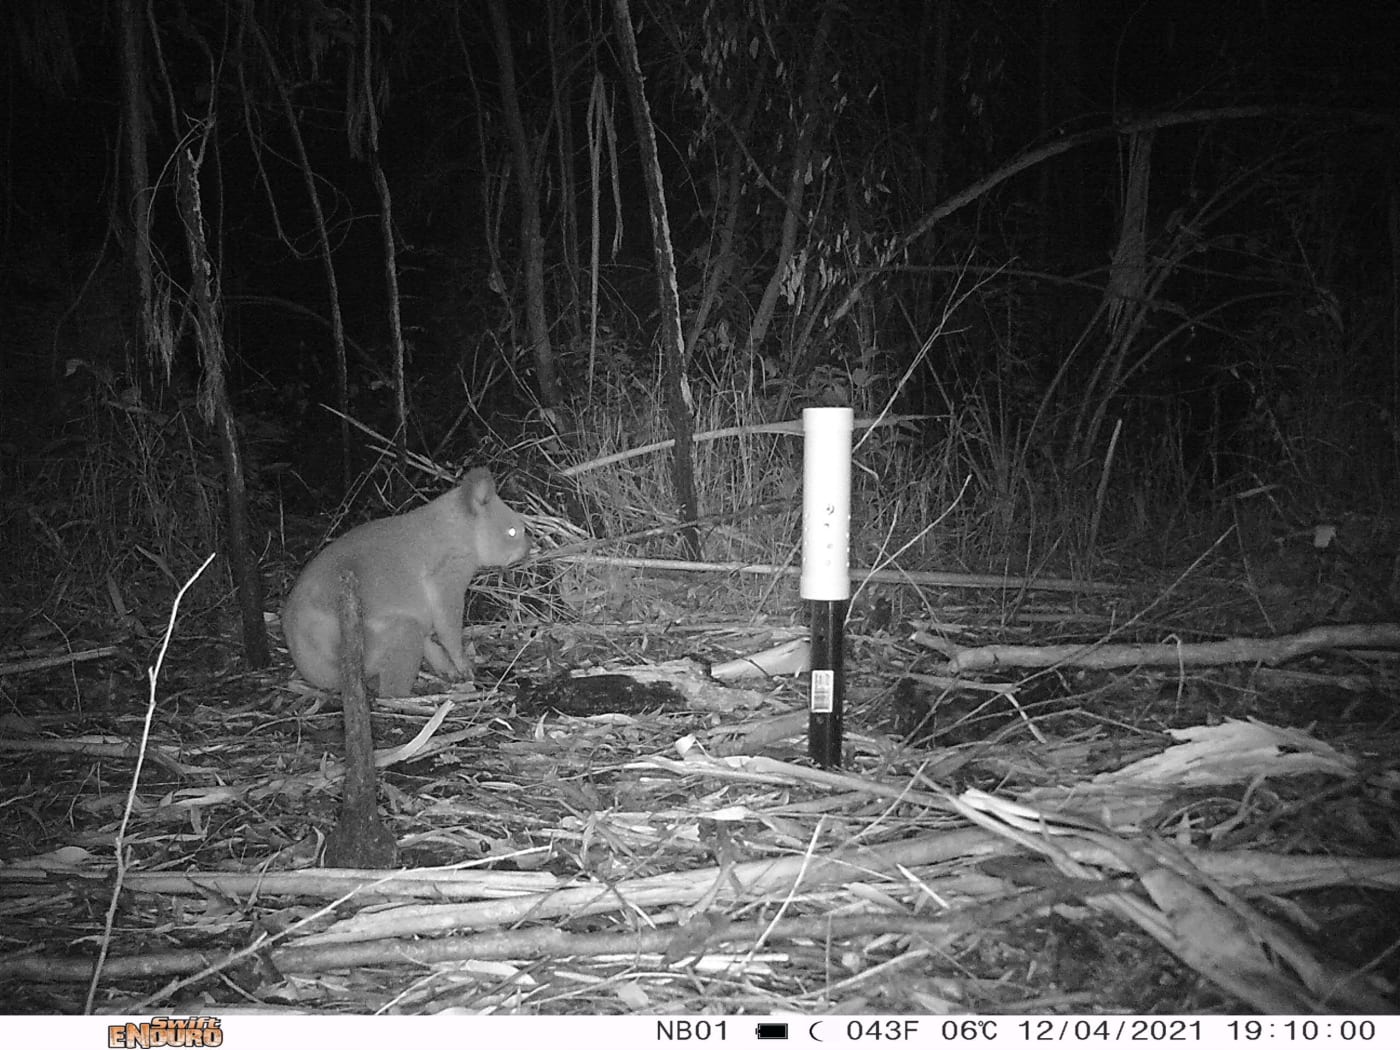 Koala captured in a photo from a camera trap, northern NSW